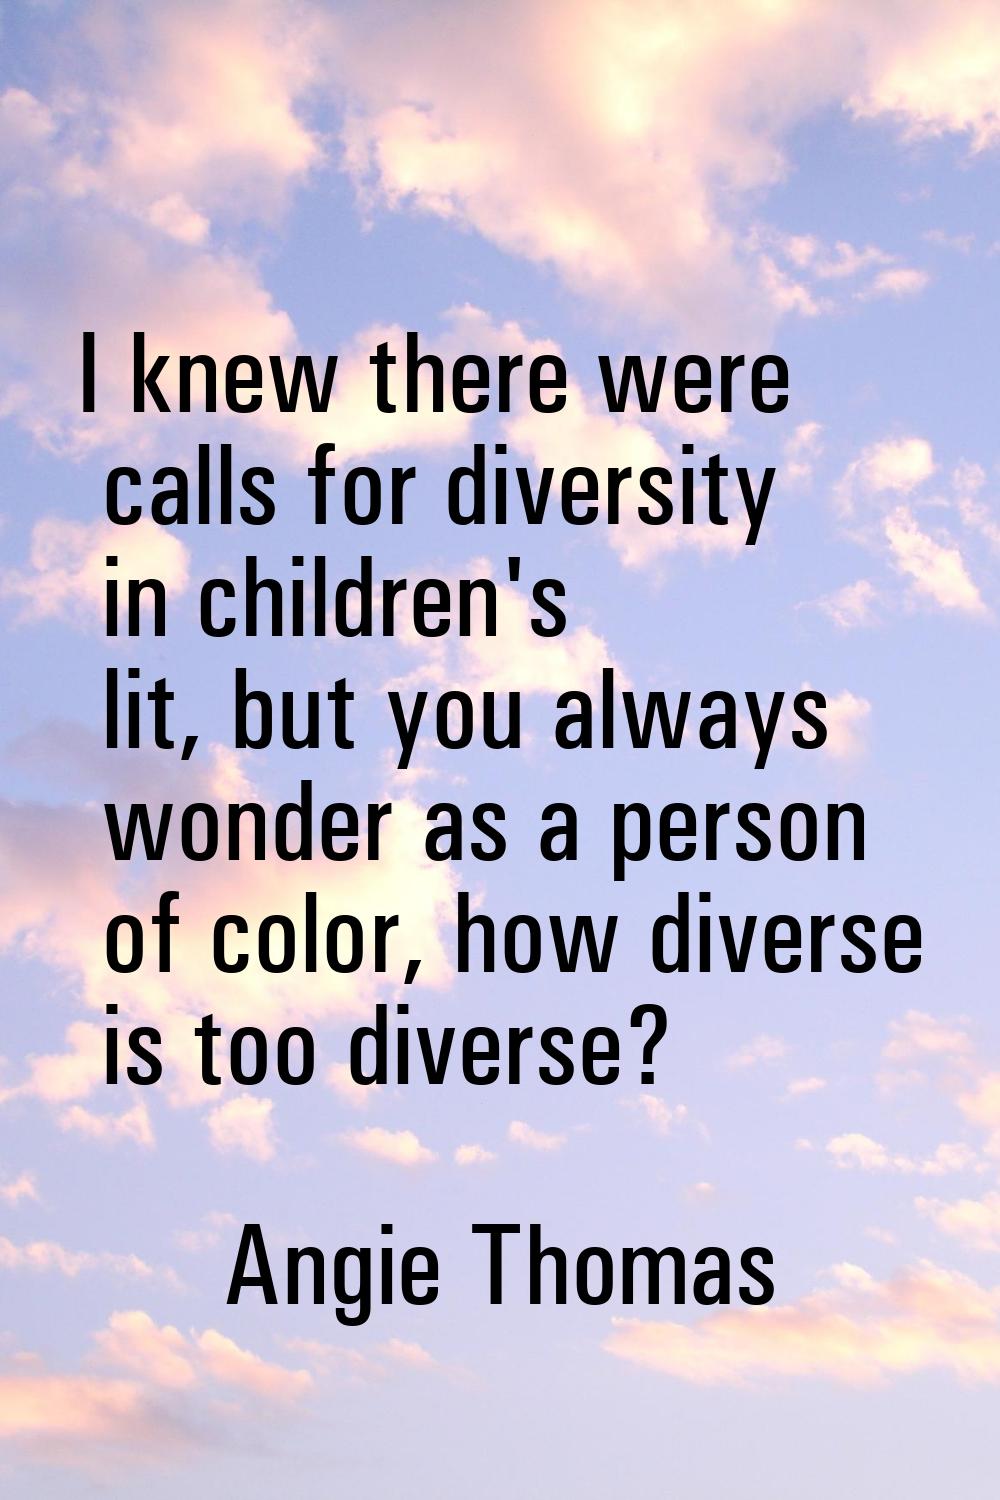 I knew there were calls for diversity in children's lit, but you always wonder as a person of color